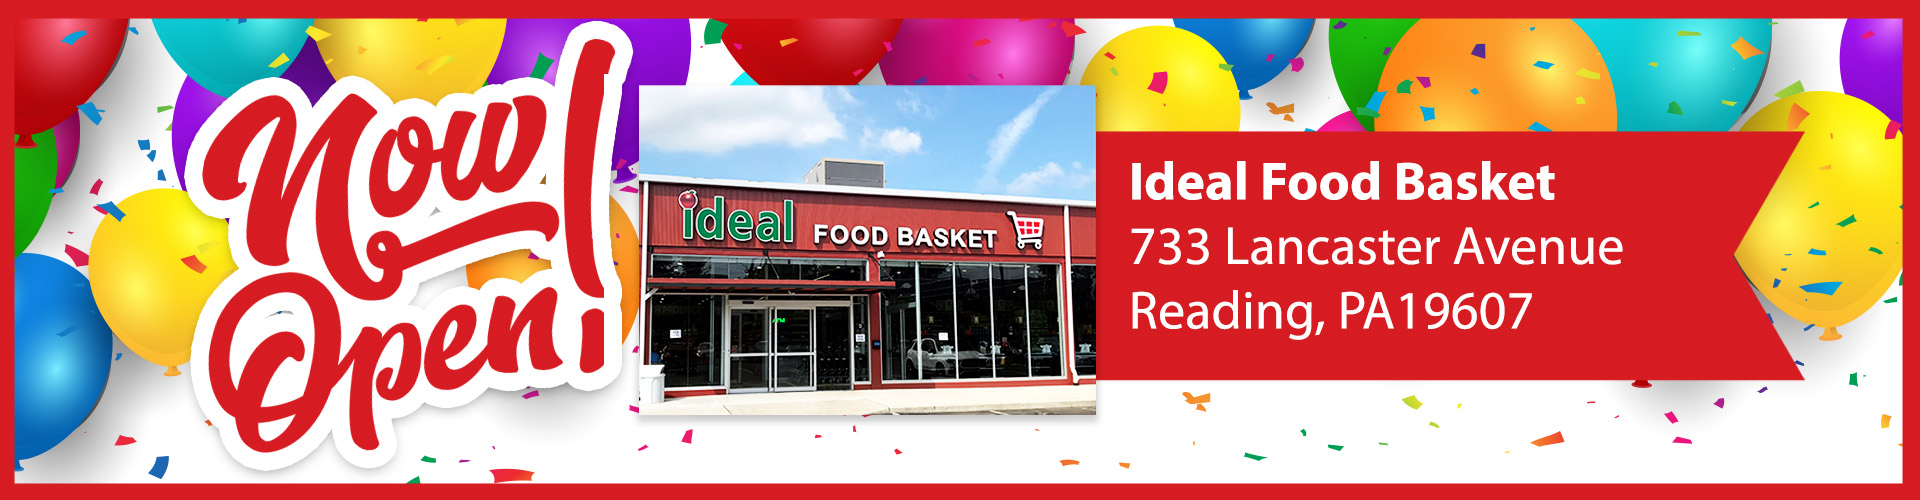 Now Open! Ideal Food Basket 733 Lancaster Avenue Reading Pennsylvania 19607 Get Directions to Location